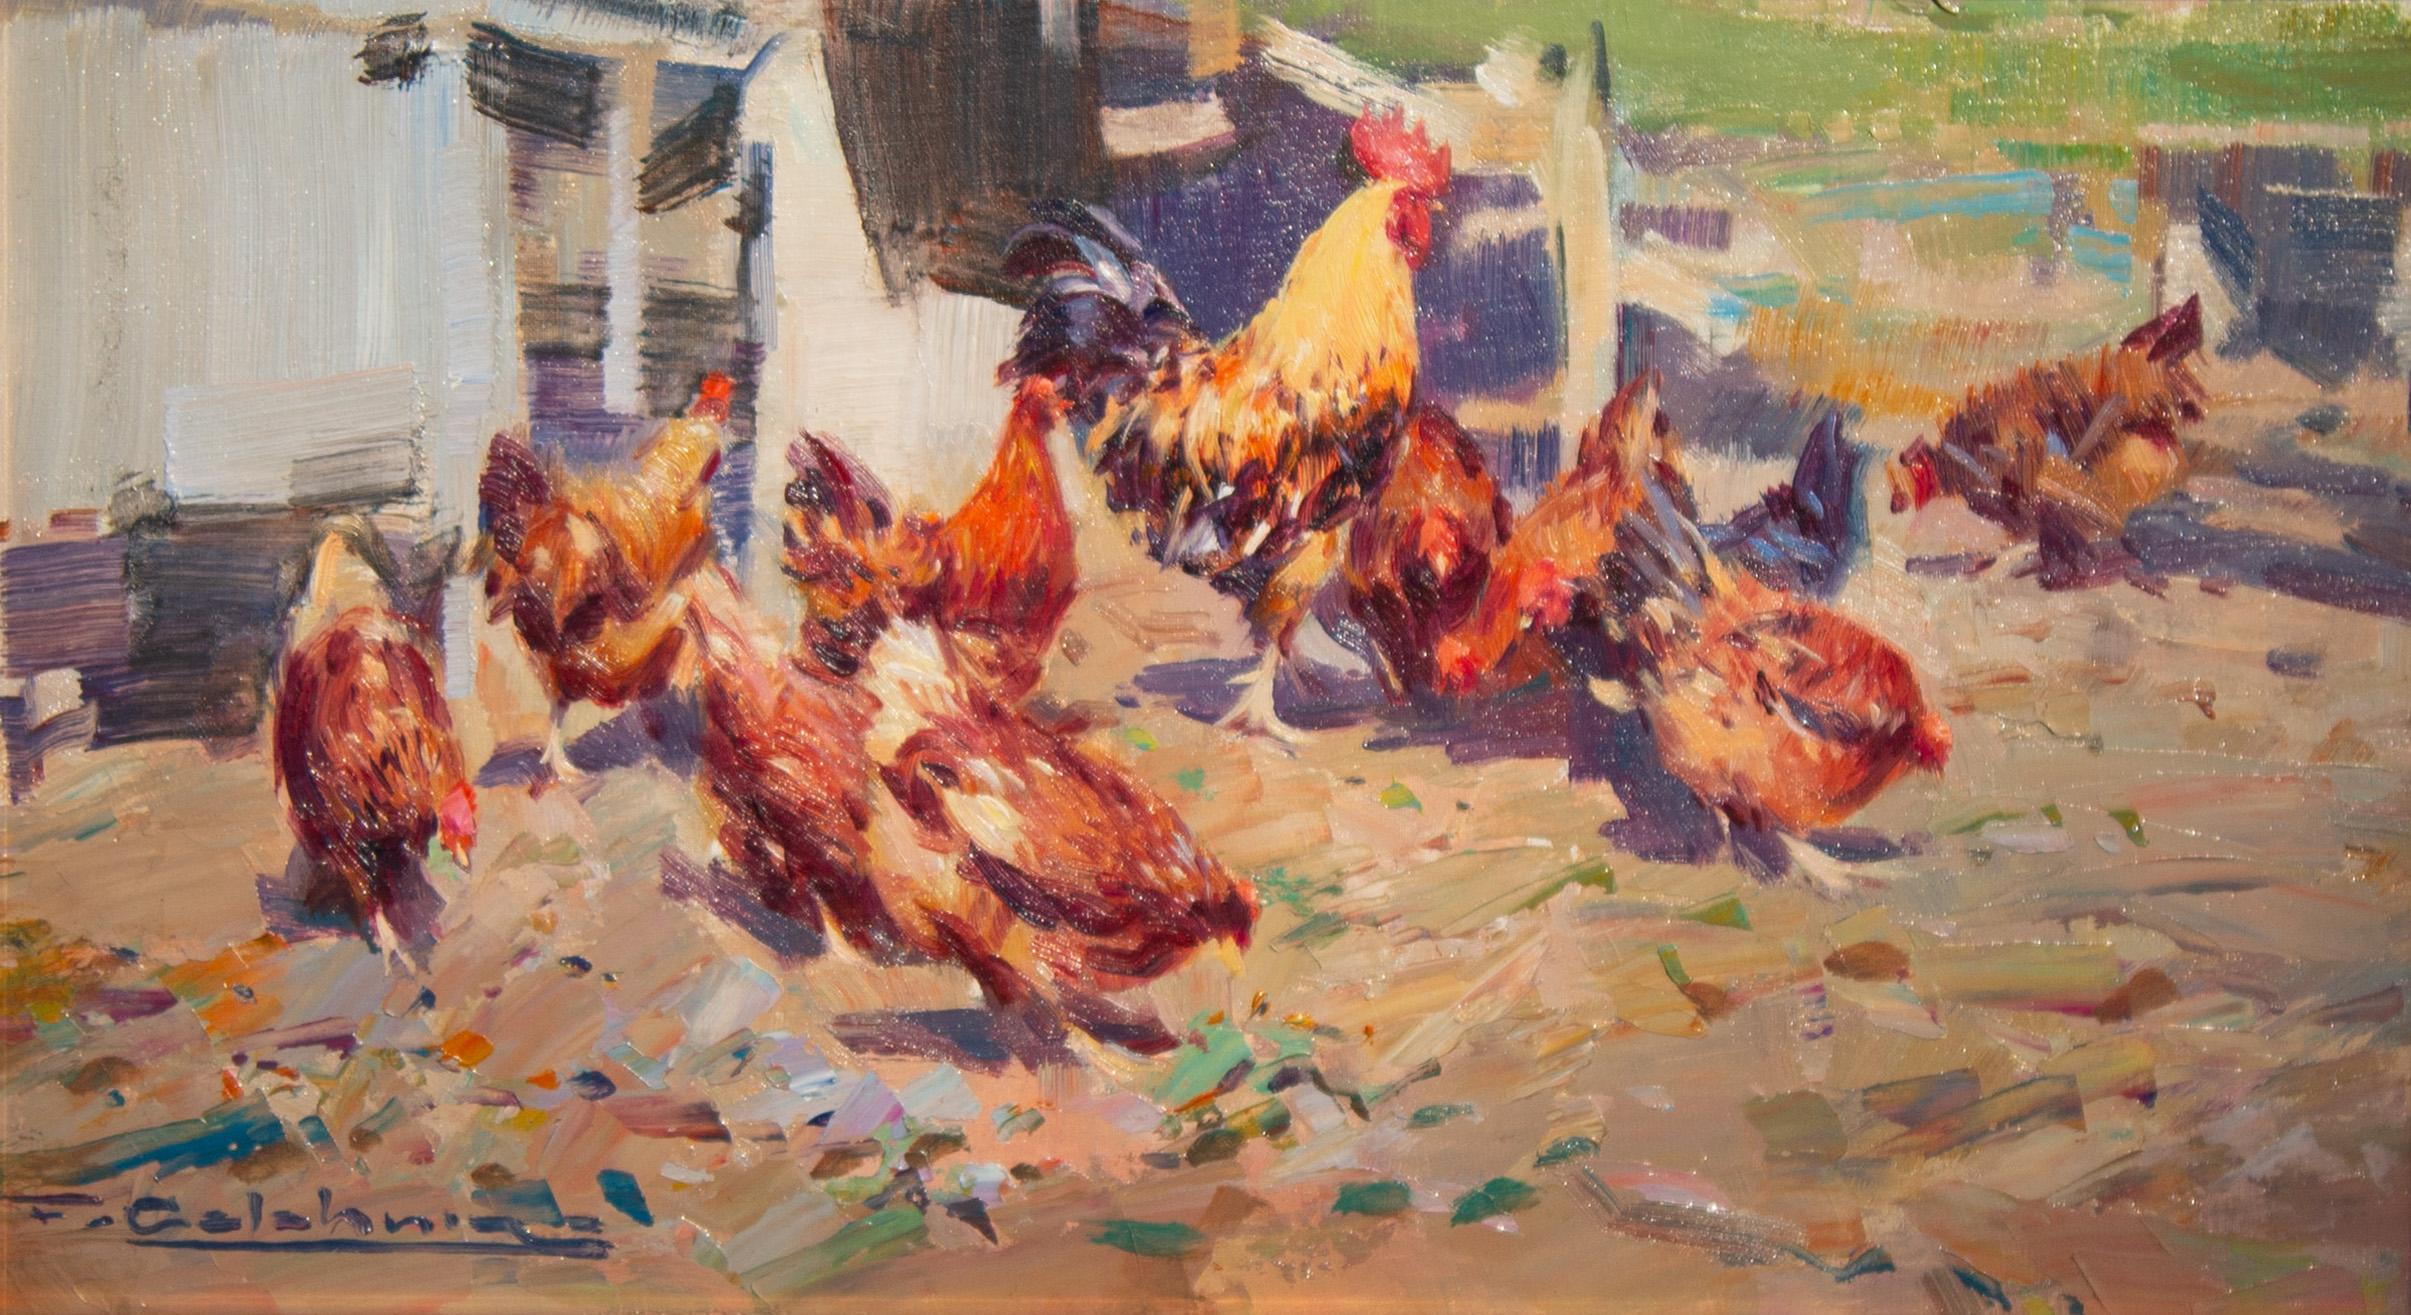 'The Farmyard' Contemporary painting of chickens, cockerel in a farm setting - Painting by Francisco Calabuig